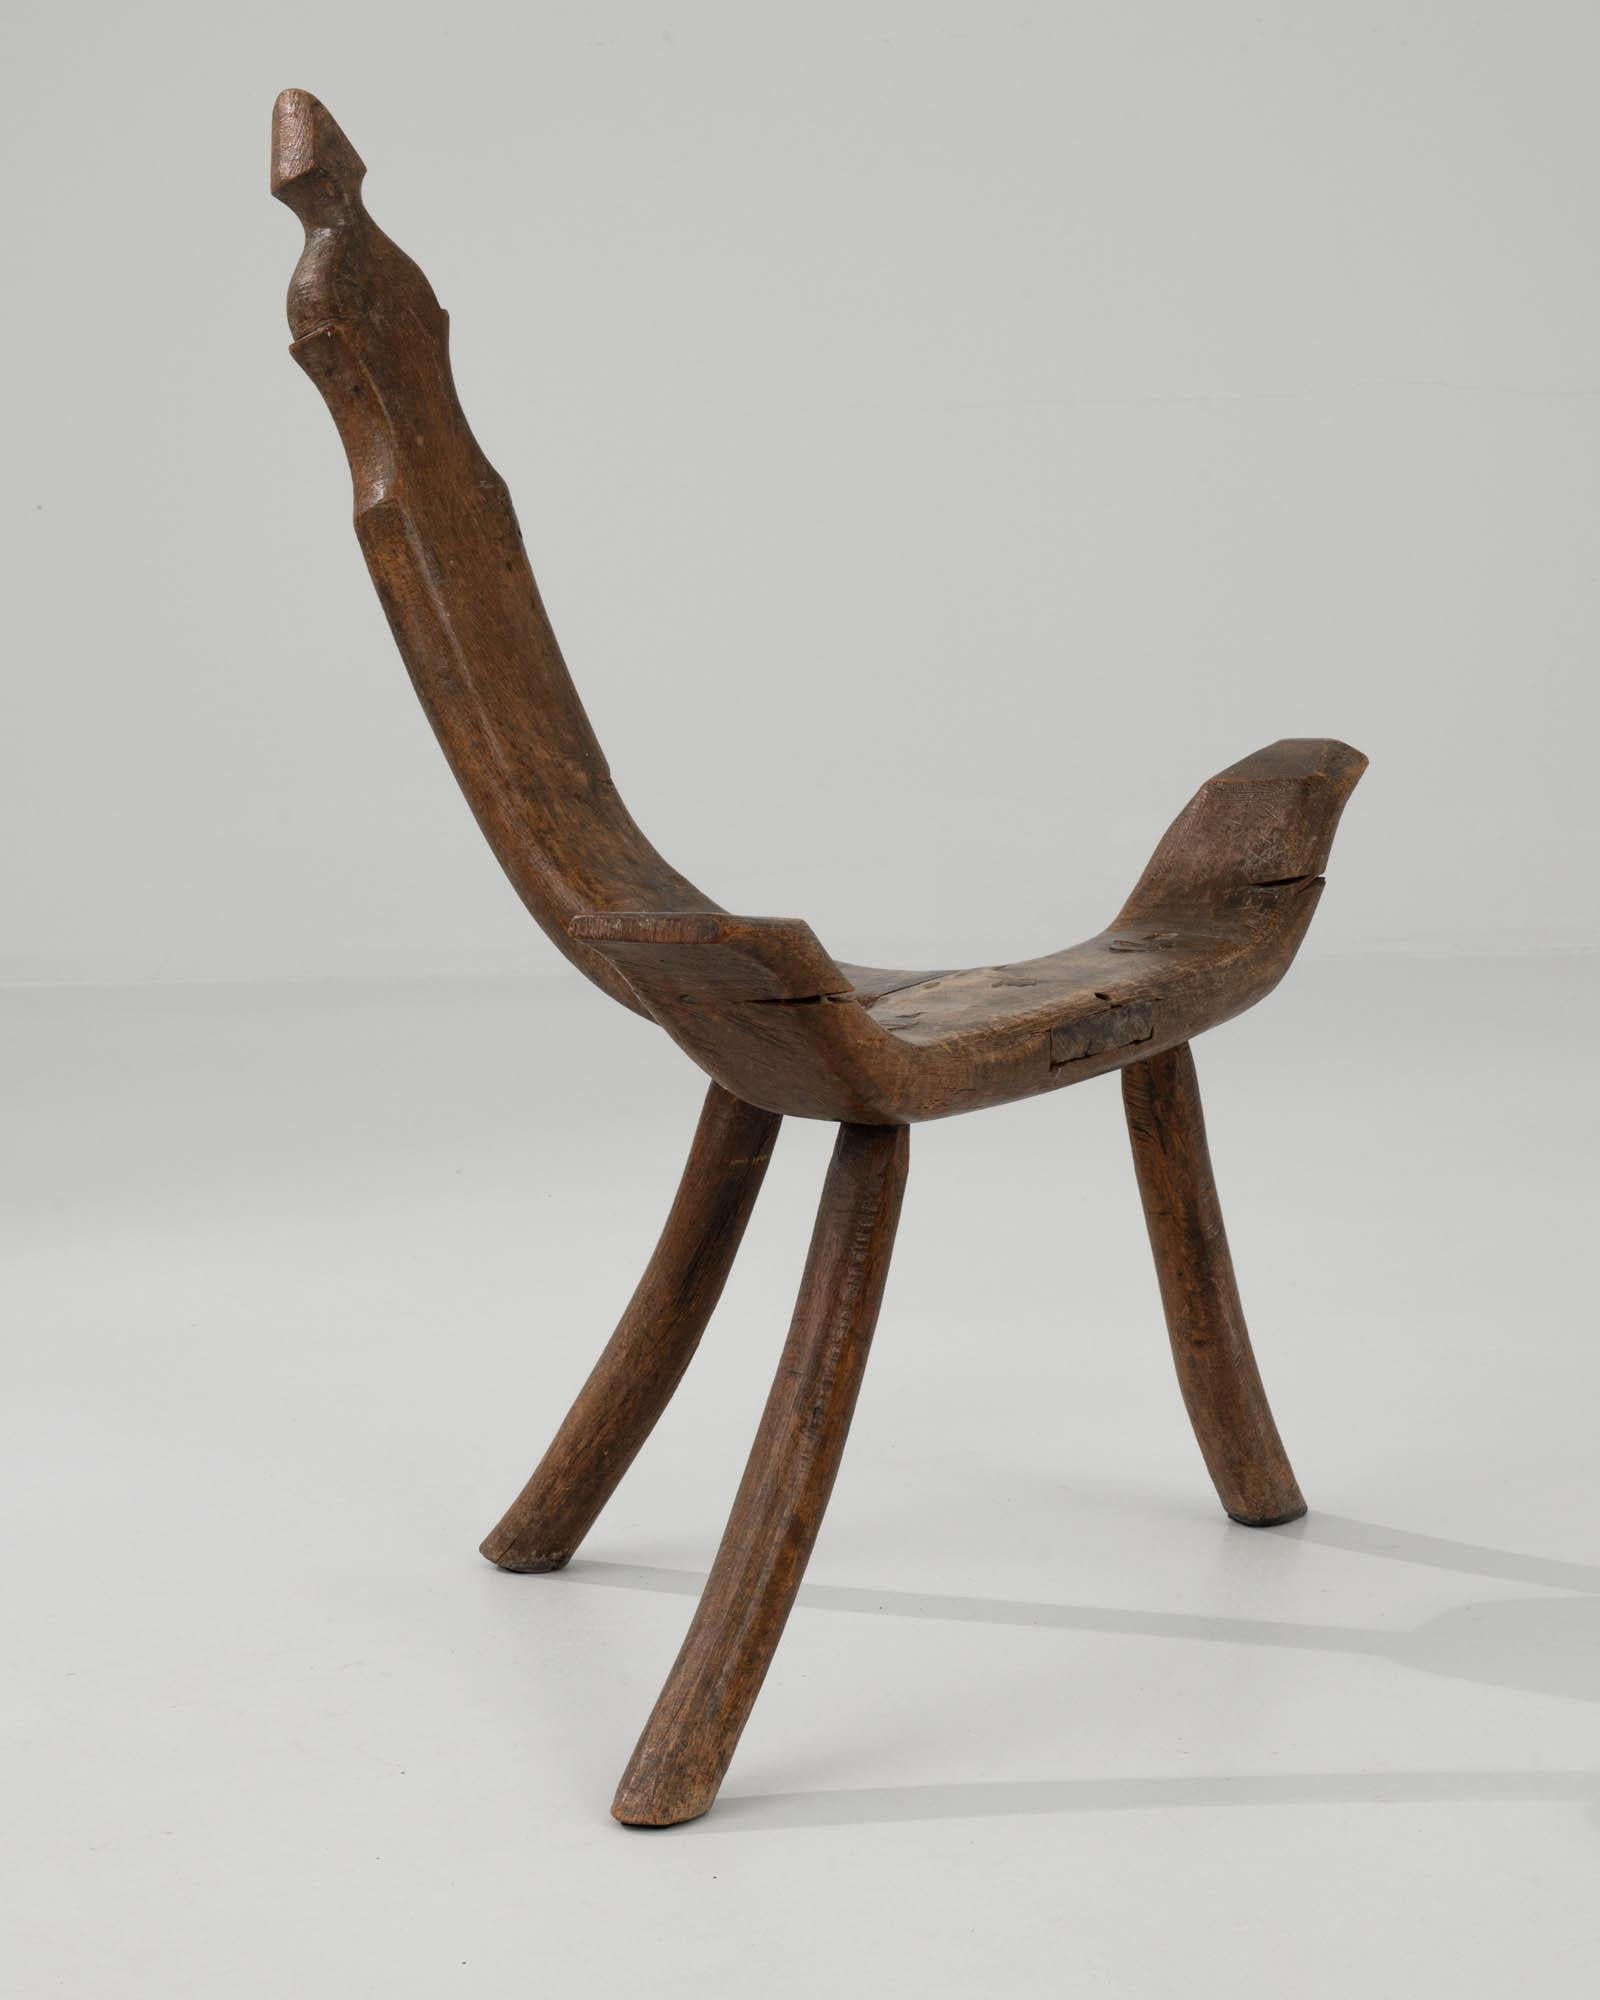 20th Century Spanish Rustic Wooden Chair 6